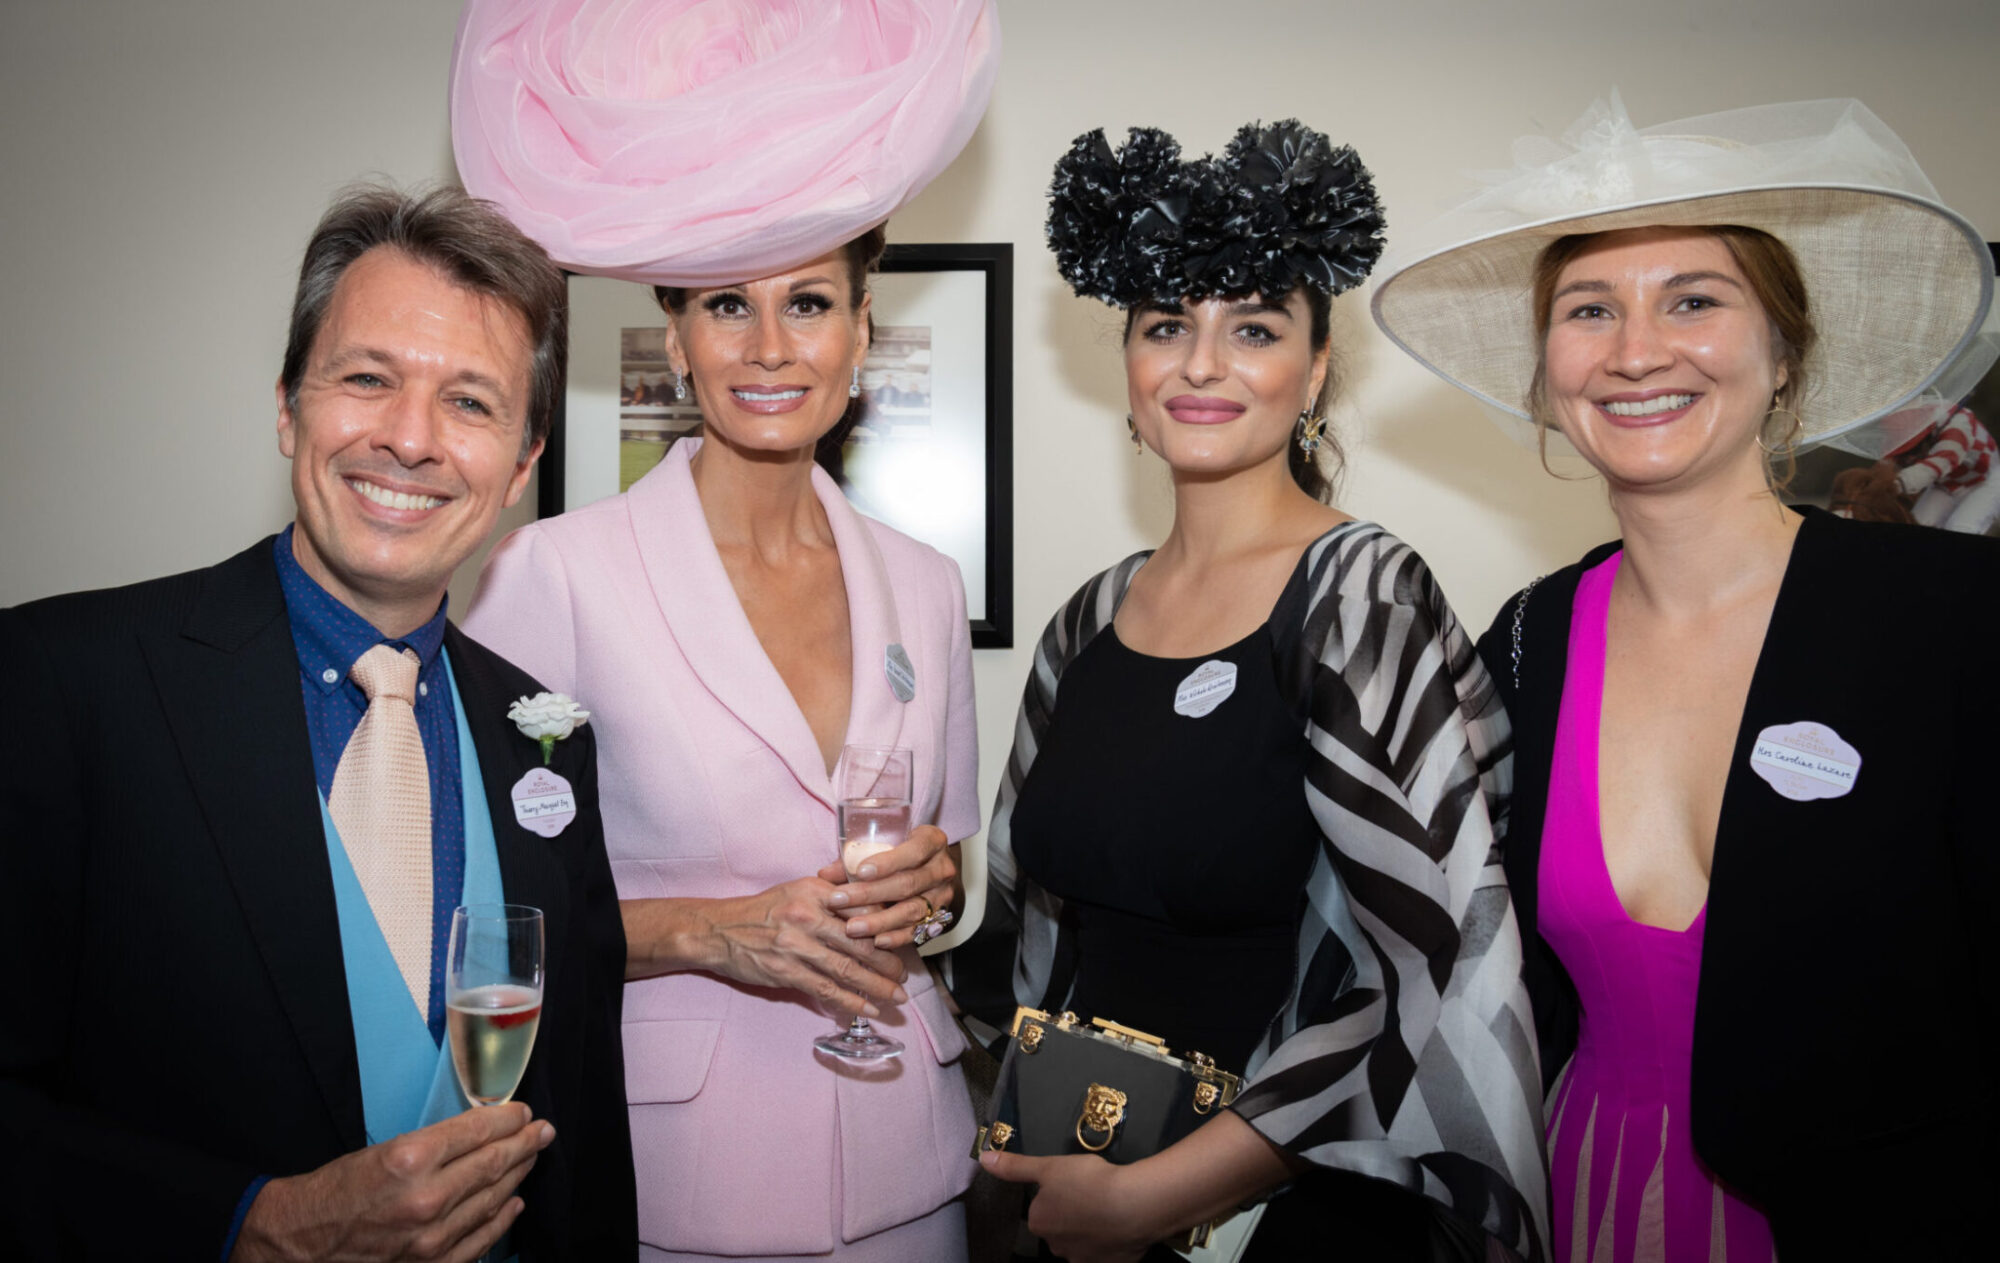 AT ROYAL ASCOT WITH MY DEAR FRIEND ISABELL KRISTENSEN AND HER FAMILY